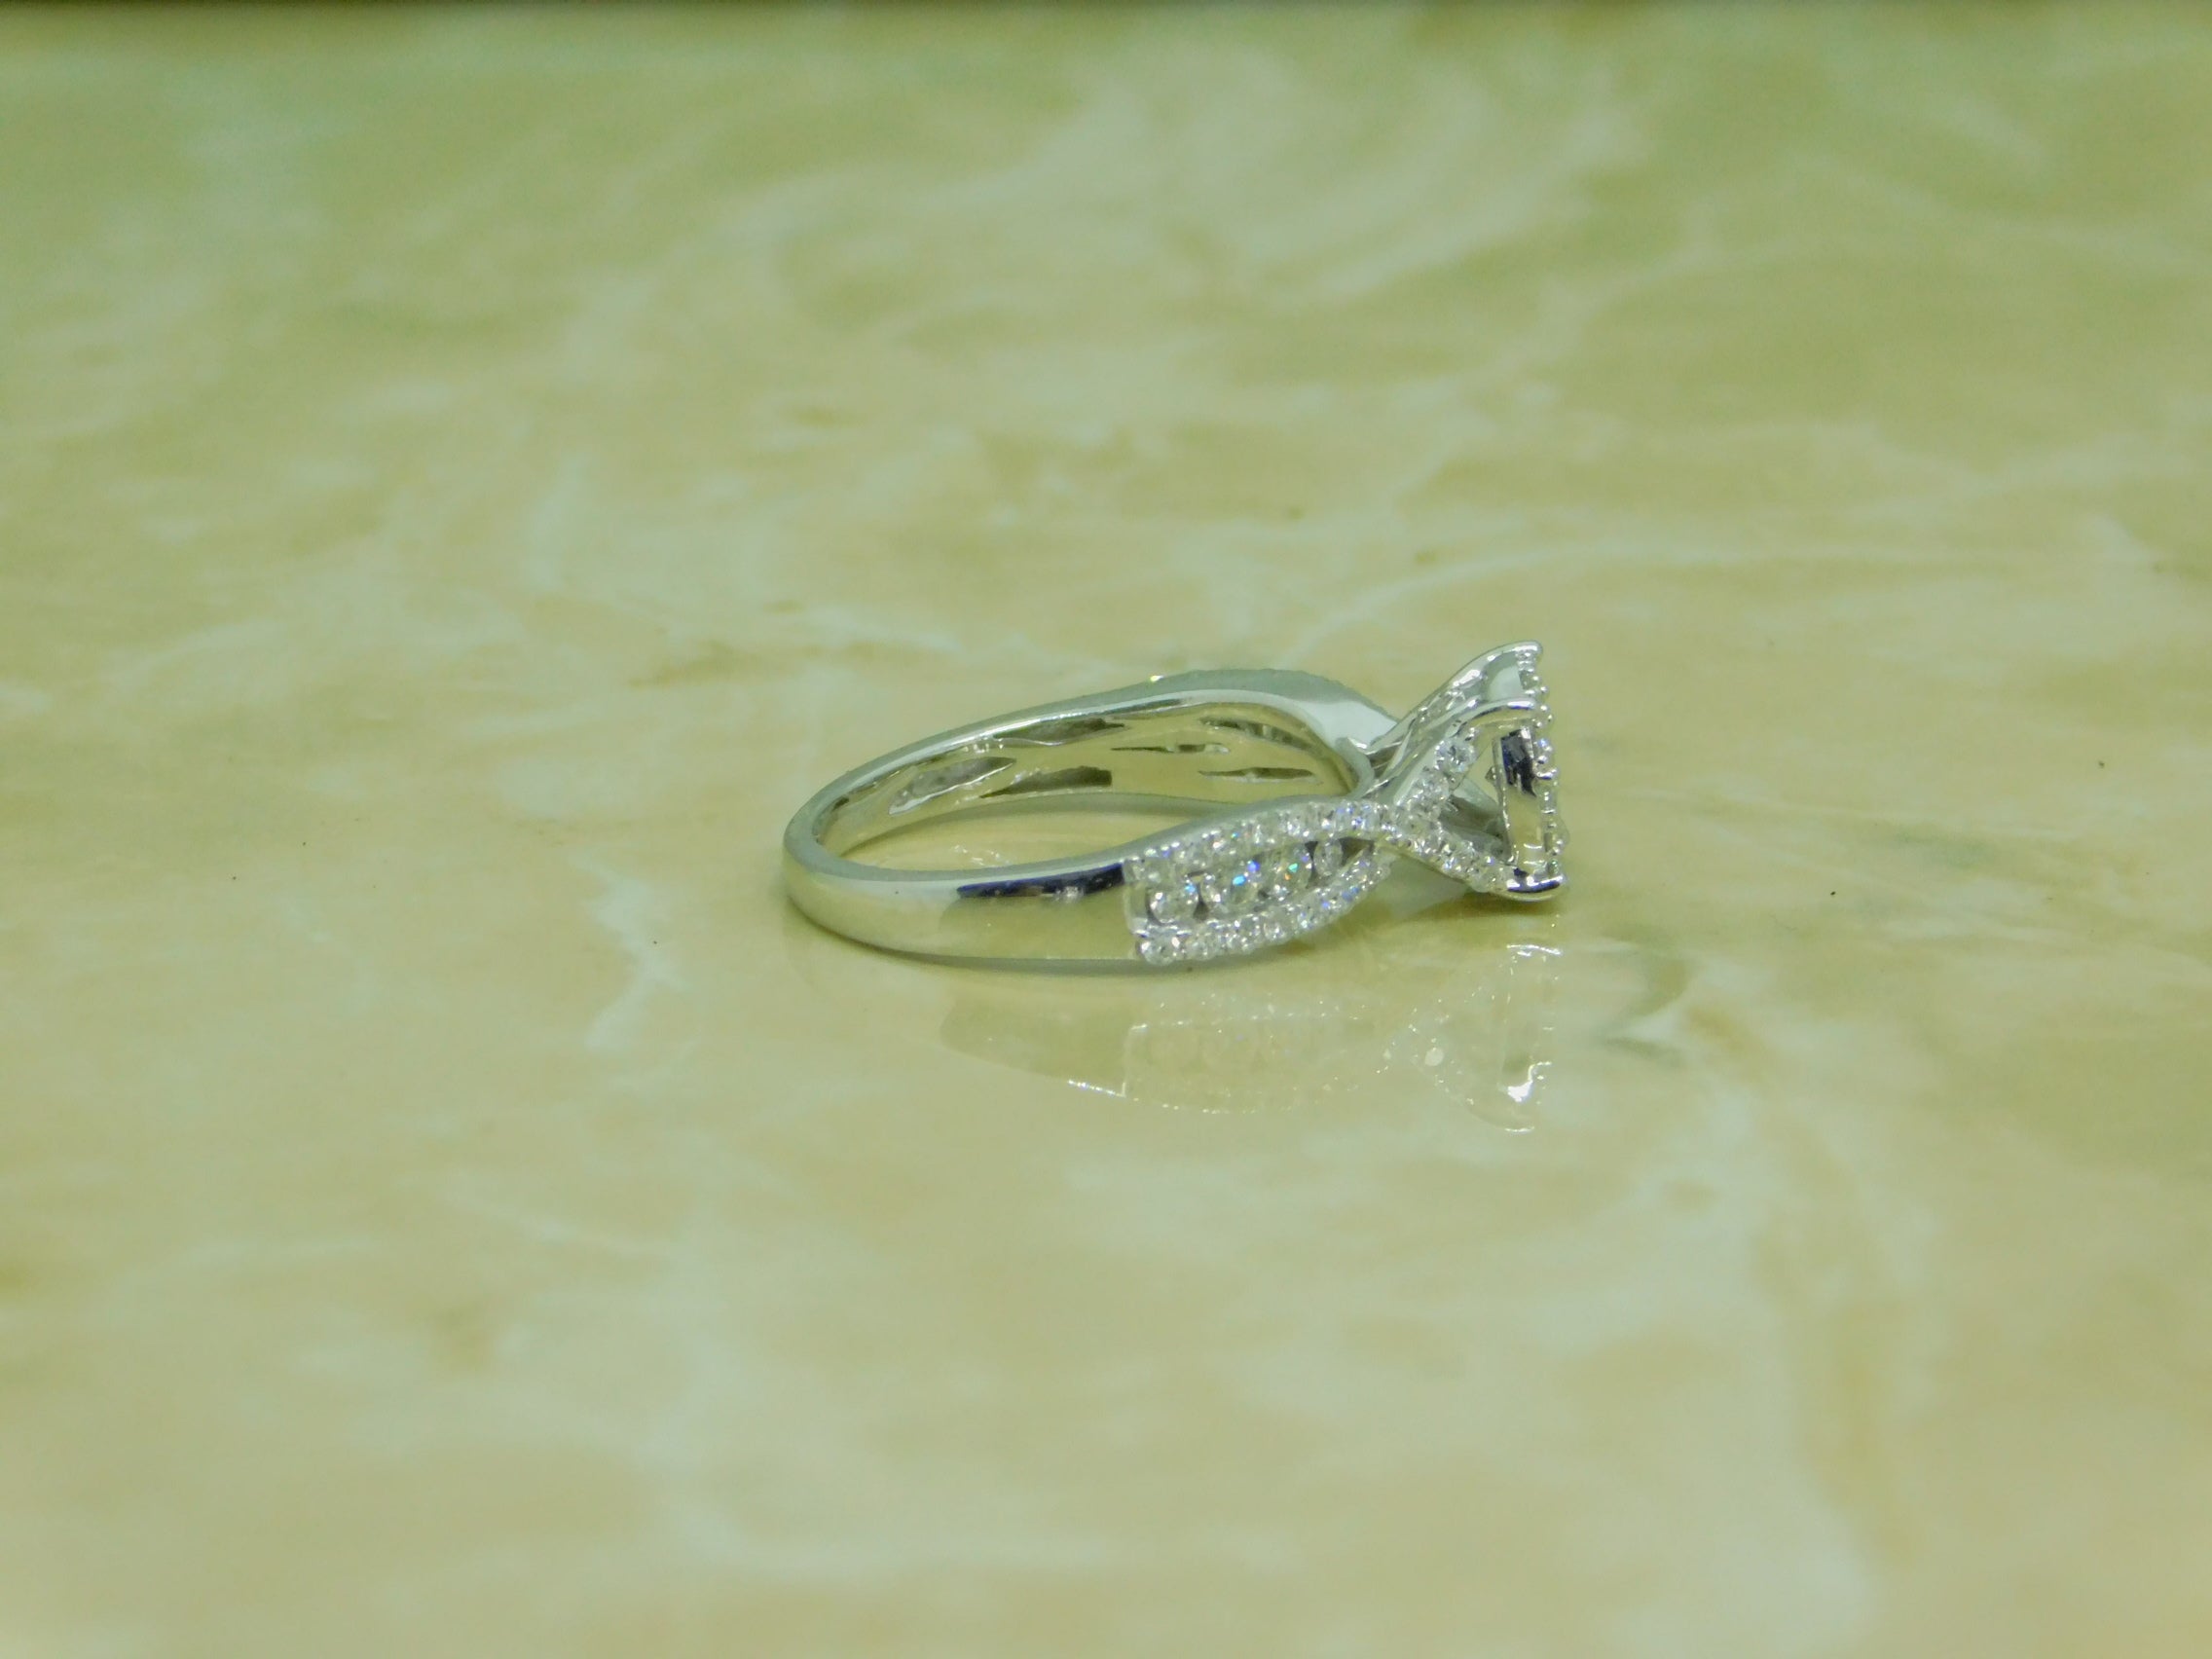 Ladies Engagement Ring With Matching Band